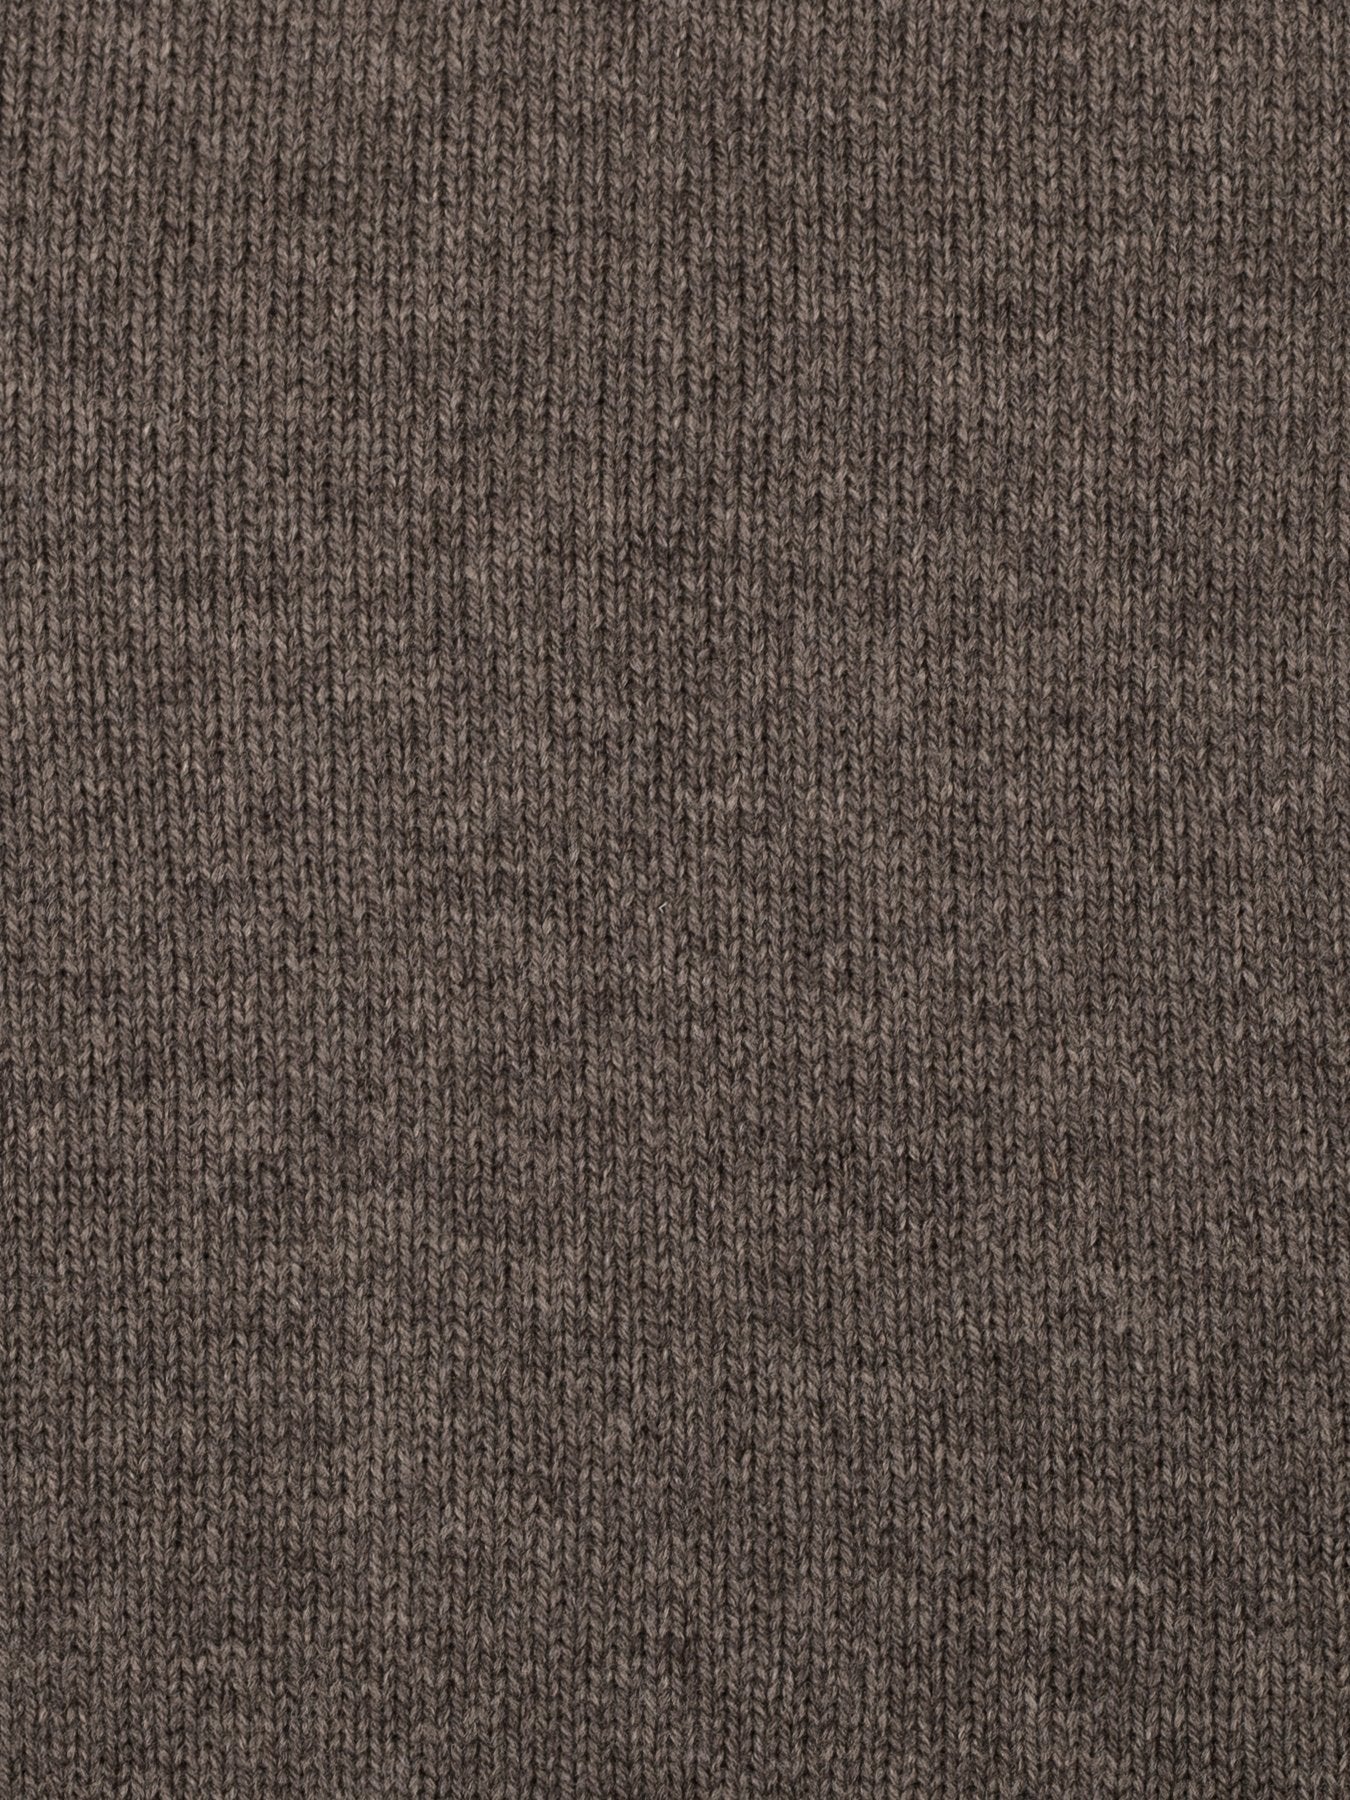 a swatch of plain single jersey knitting made from fine merino wool in a dark brown colour